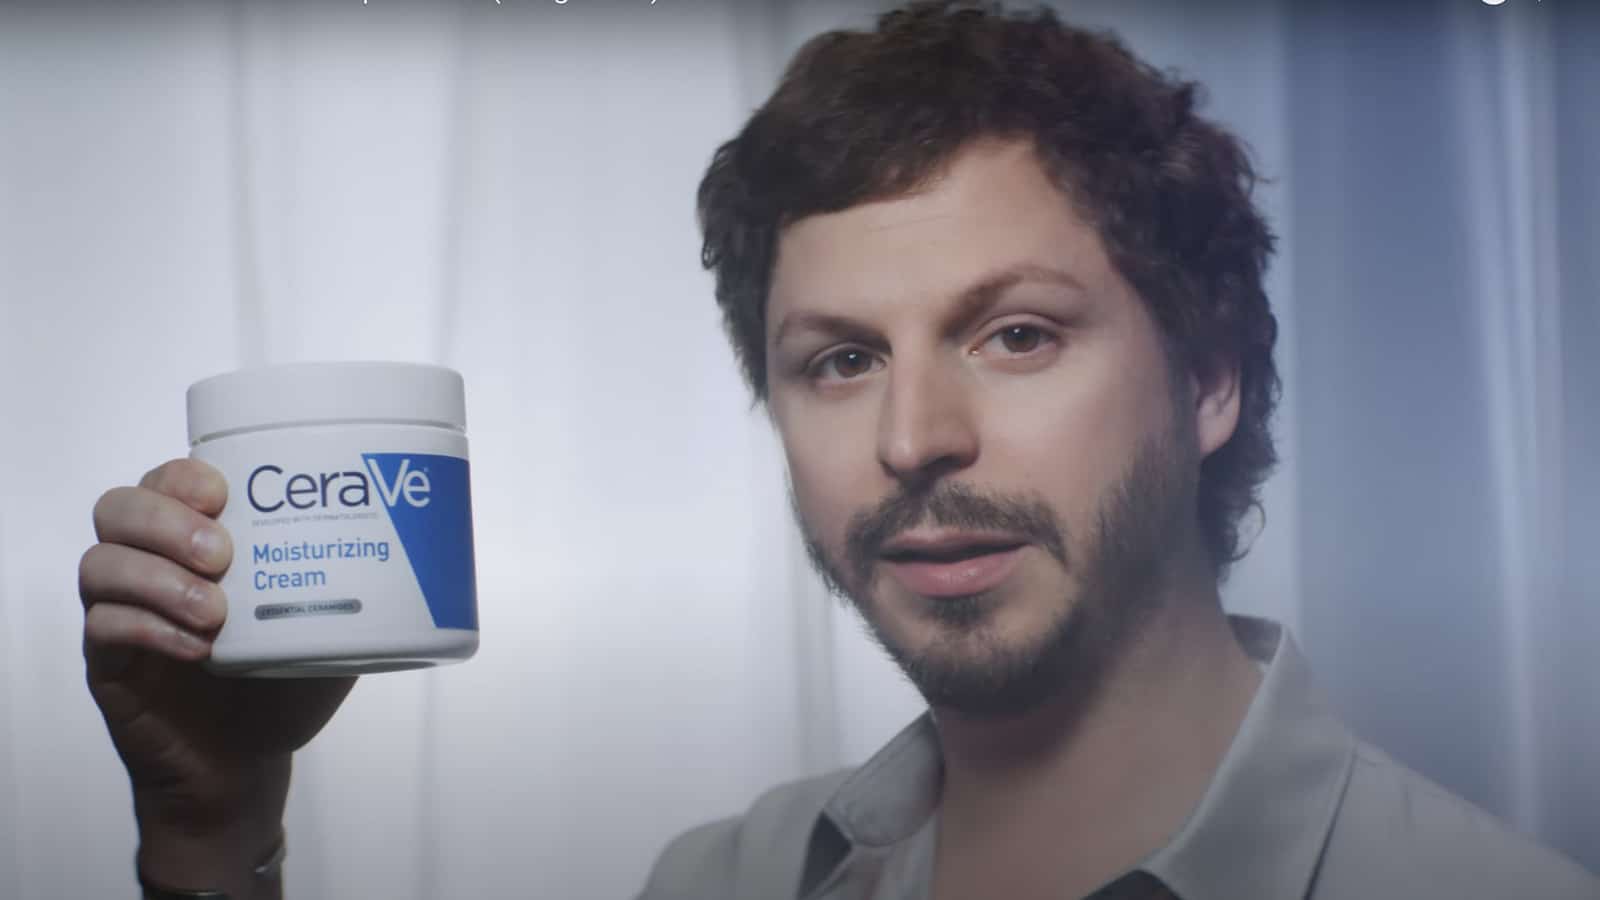 What's With Michael Cera's Cream? CeraVe's Weird Super Bowl Commercial, Explained 1